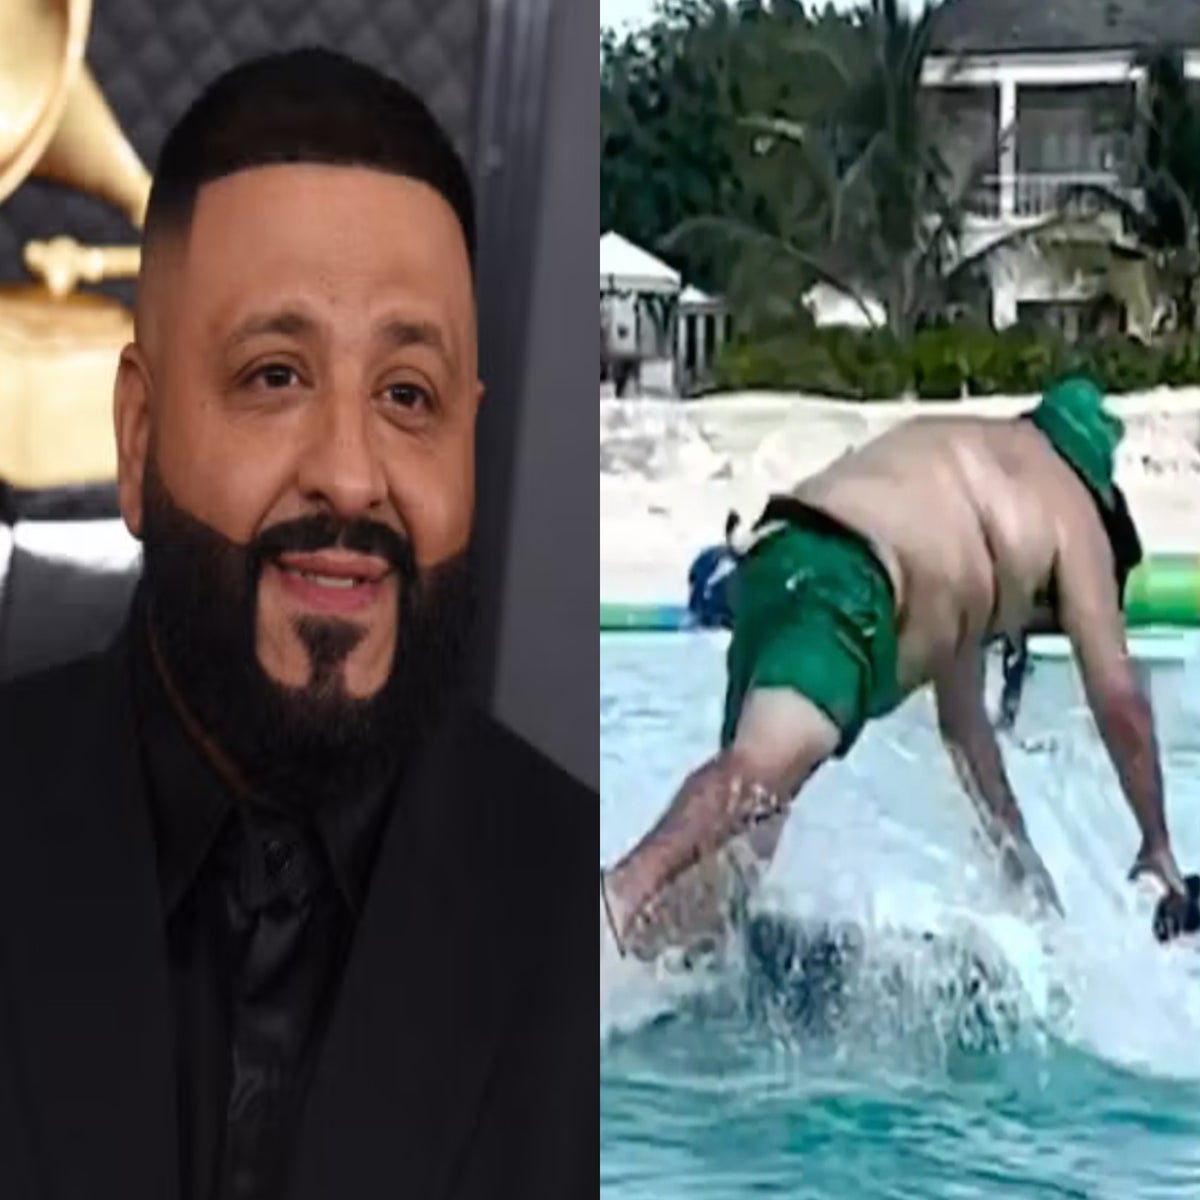 DJ Khaled surfing accident: What to know about musician's injury